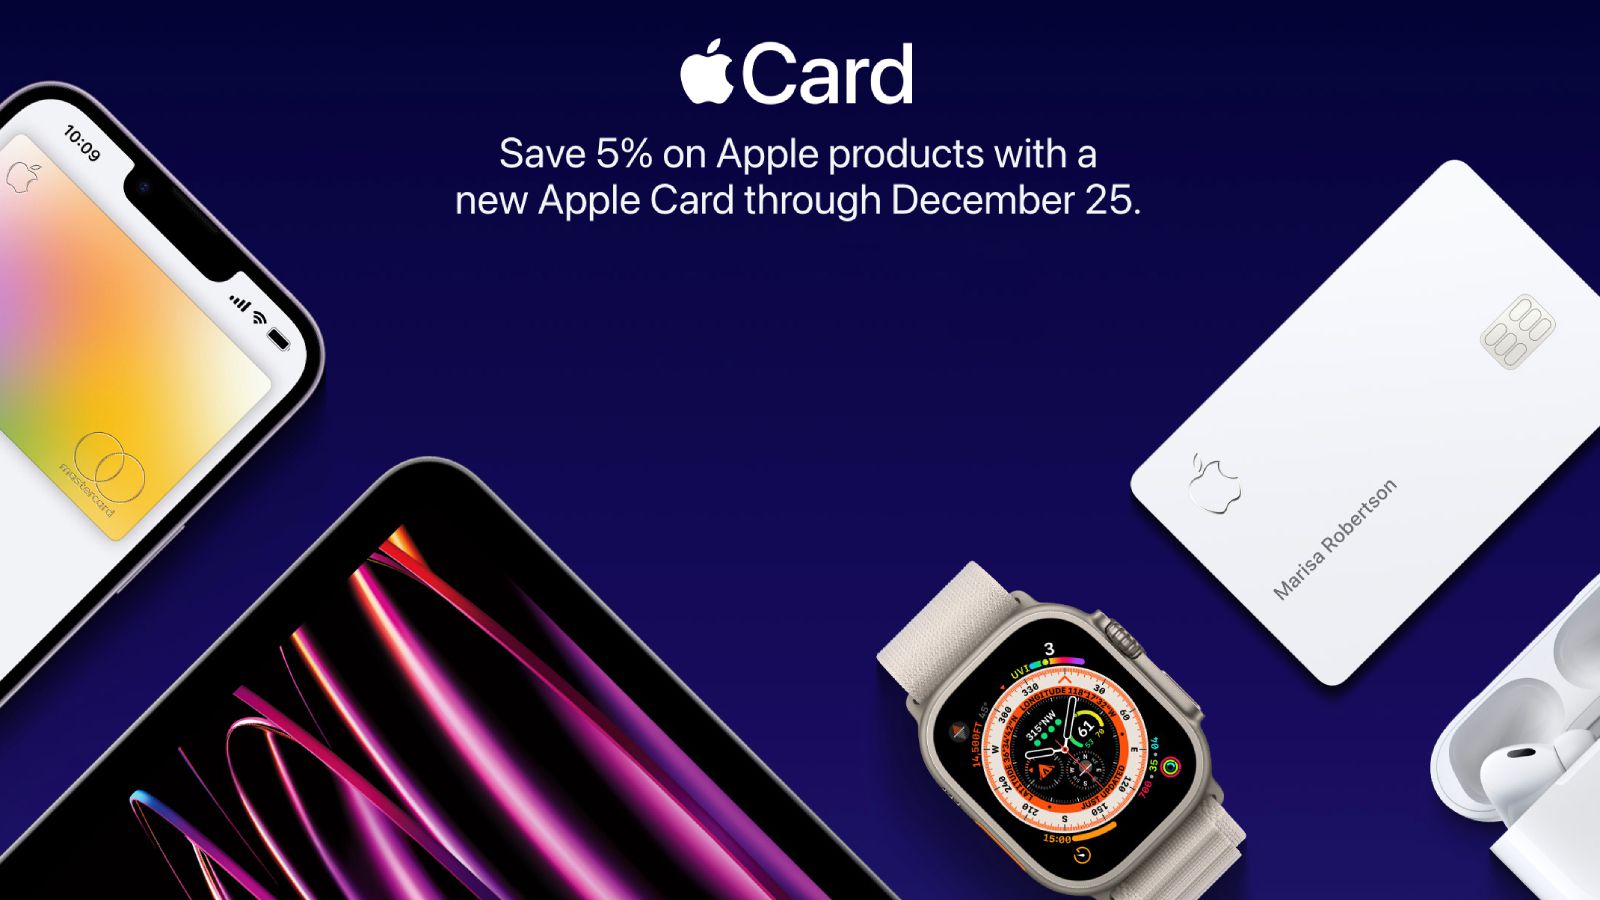 New Apple Card Customers Can Get 5% Cashback on Apple Products This Month